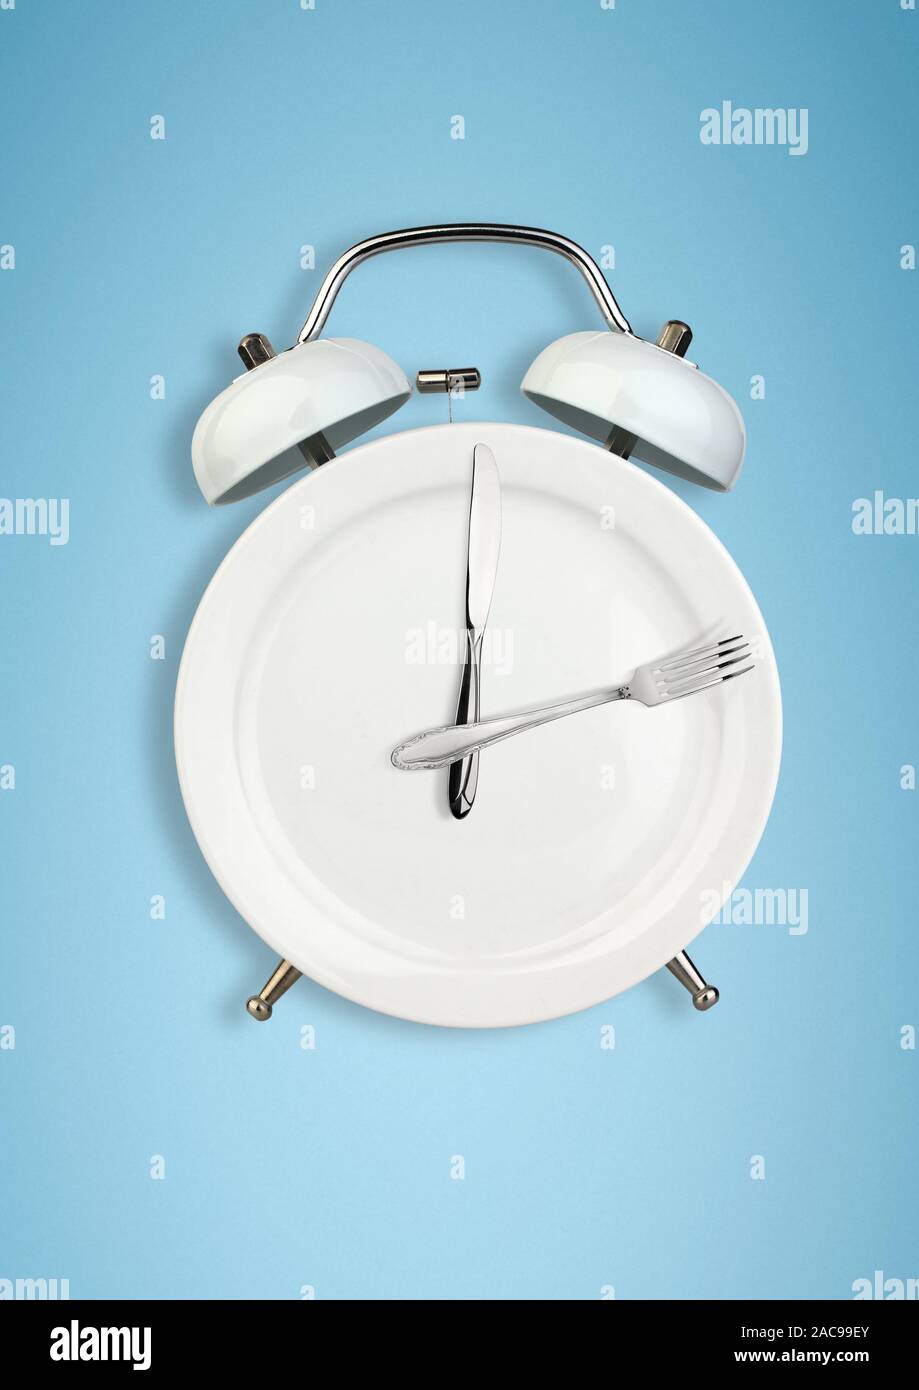 Concept of intermittent fasting, diet and weight loss. Plate as Alarm clock on blue Stock Photo